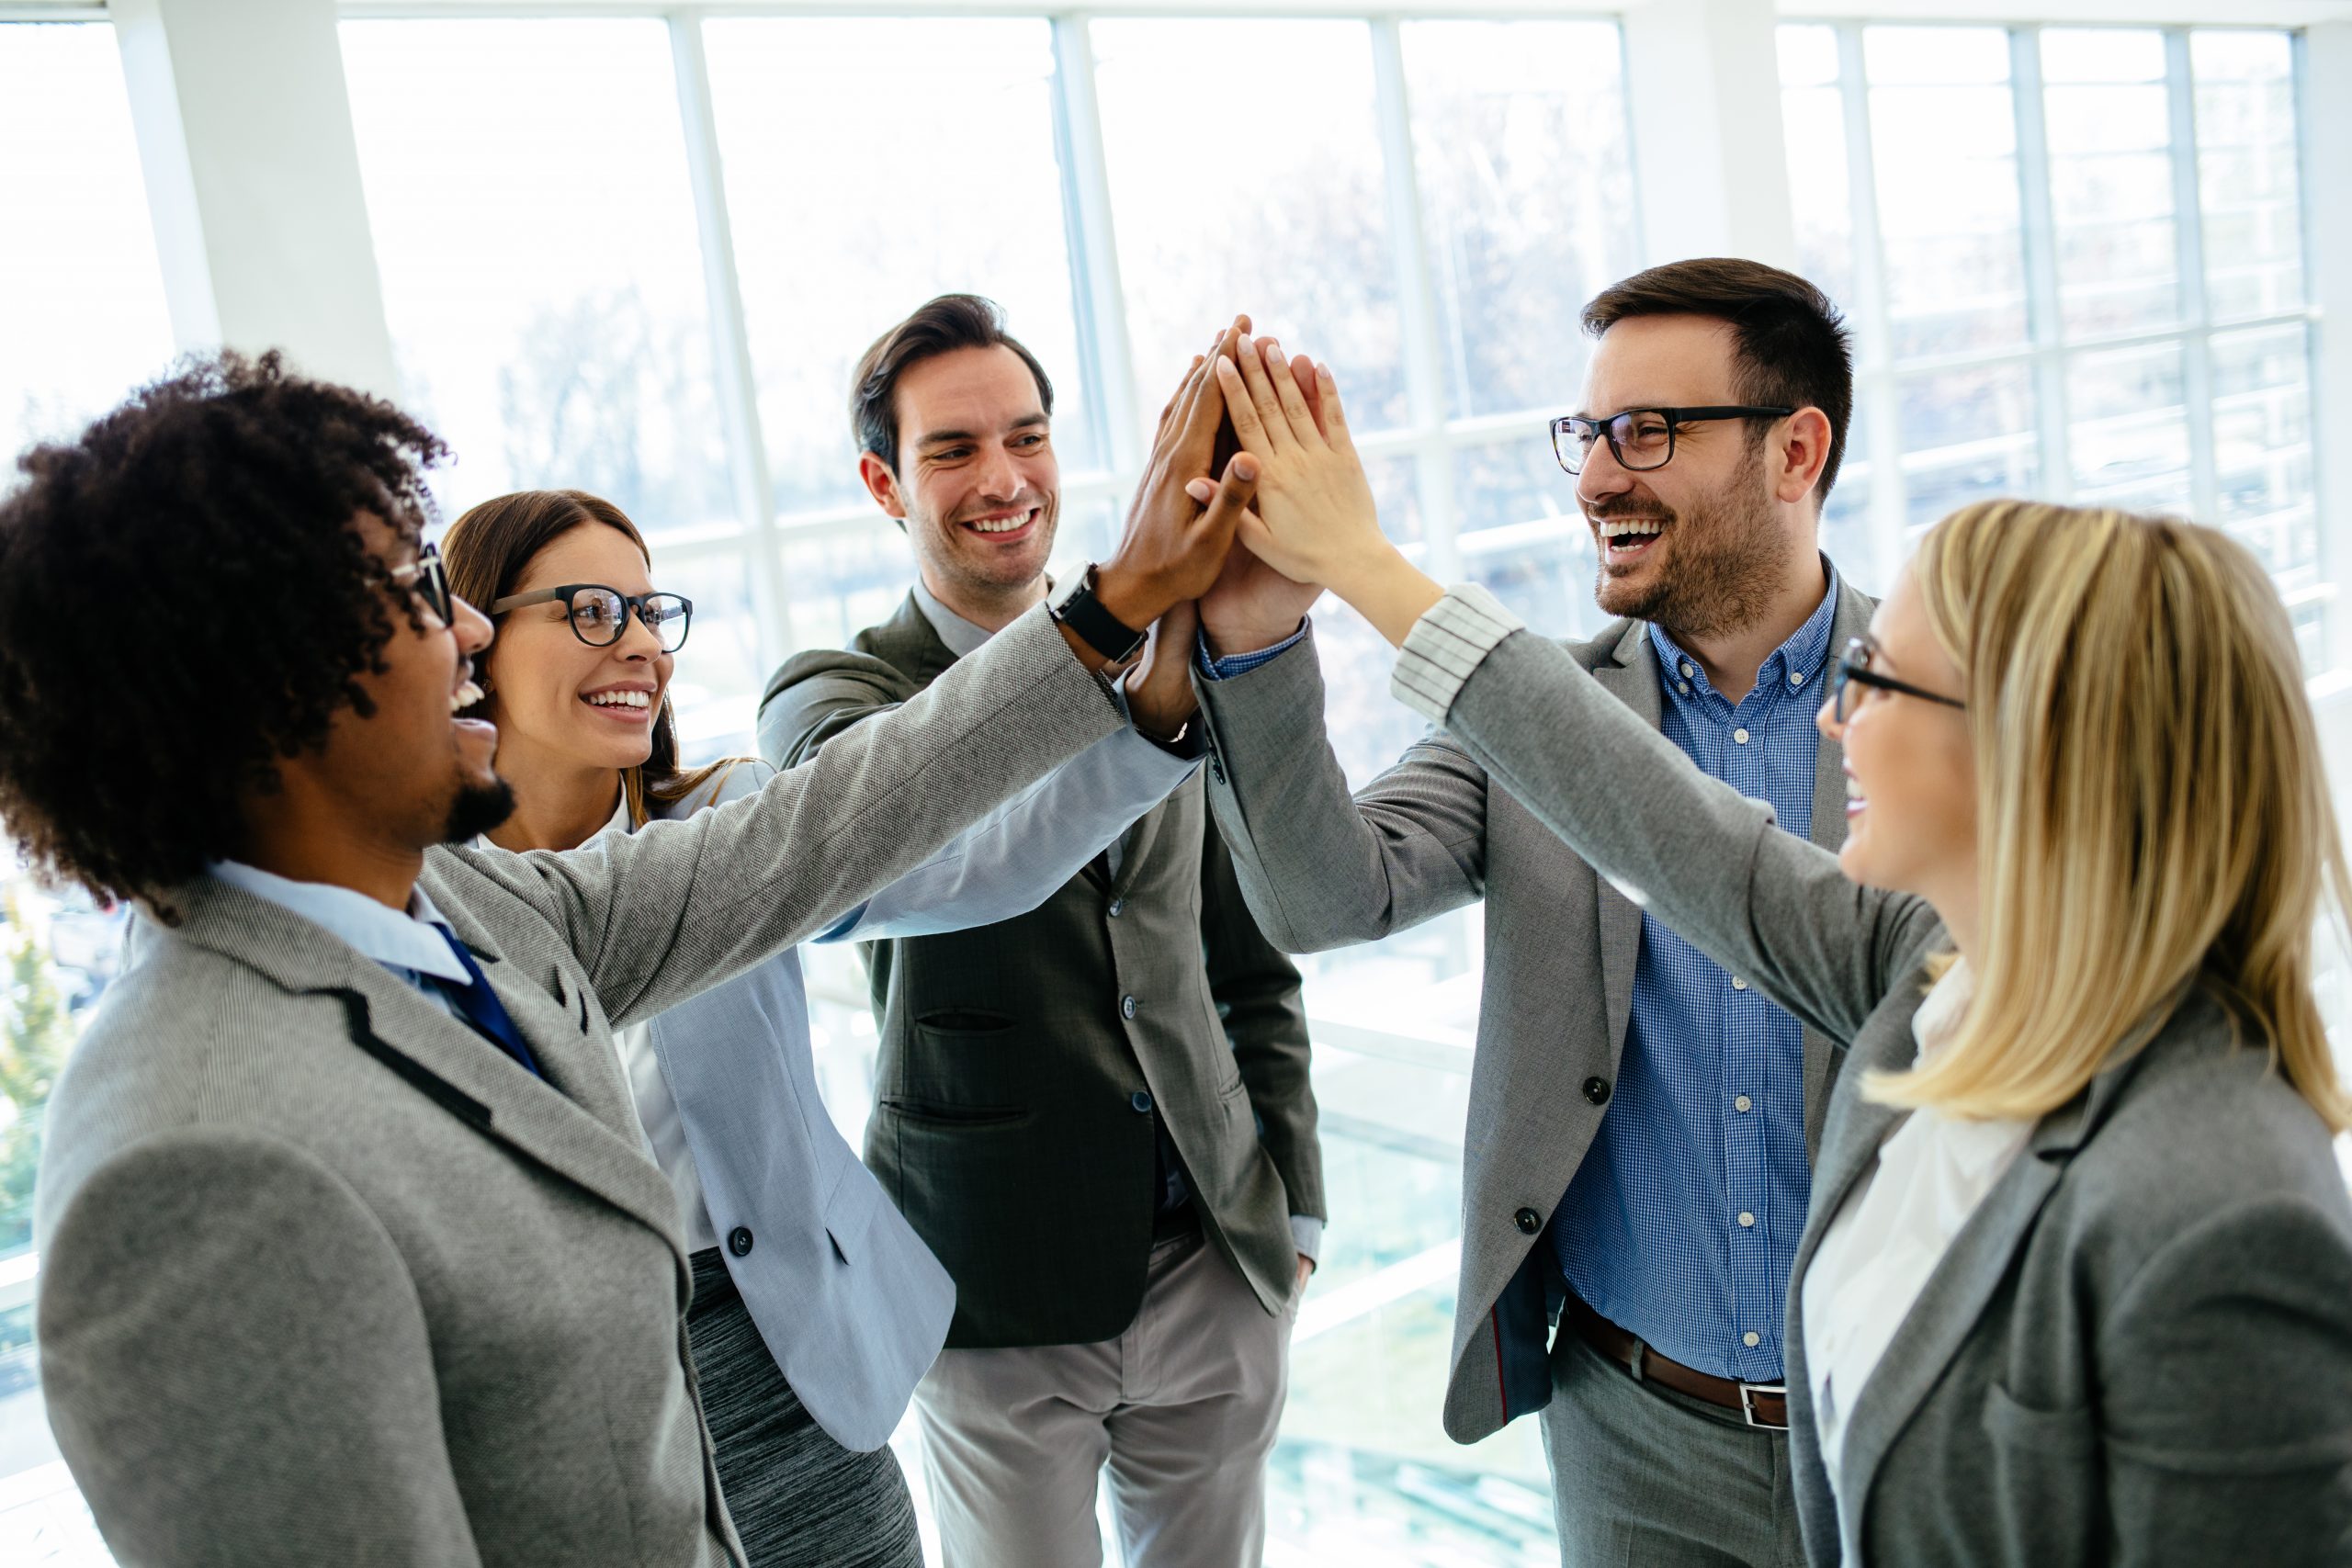 Excited business team give high five celebrate corporate success